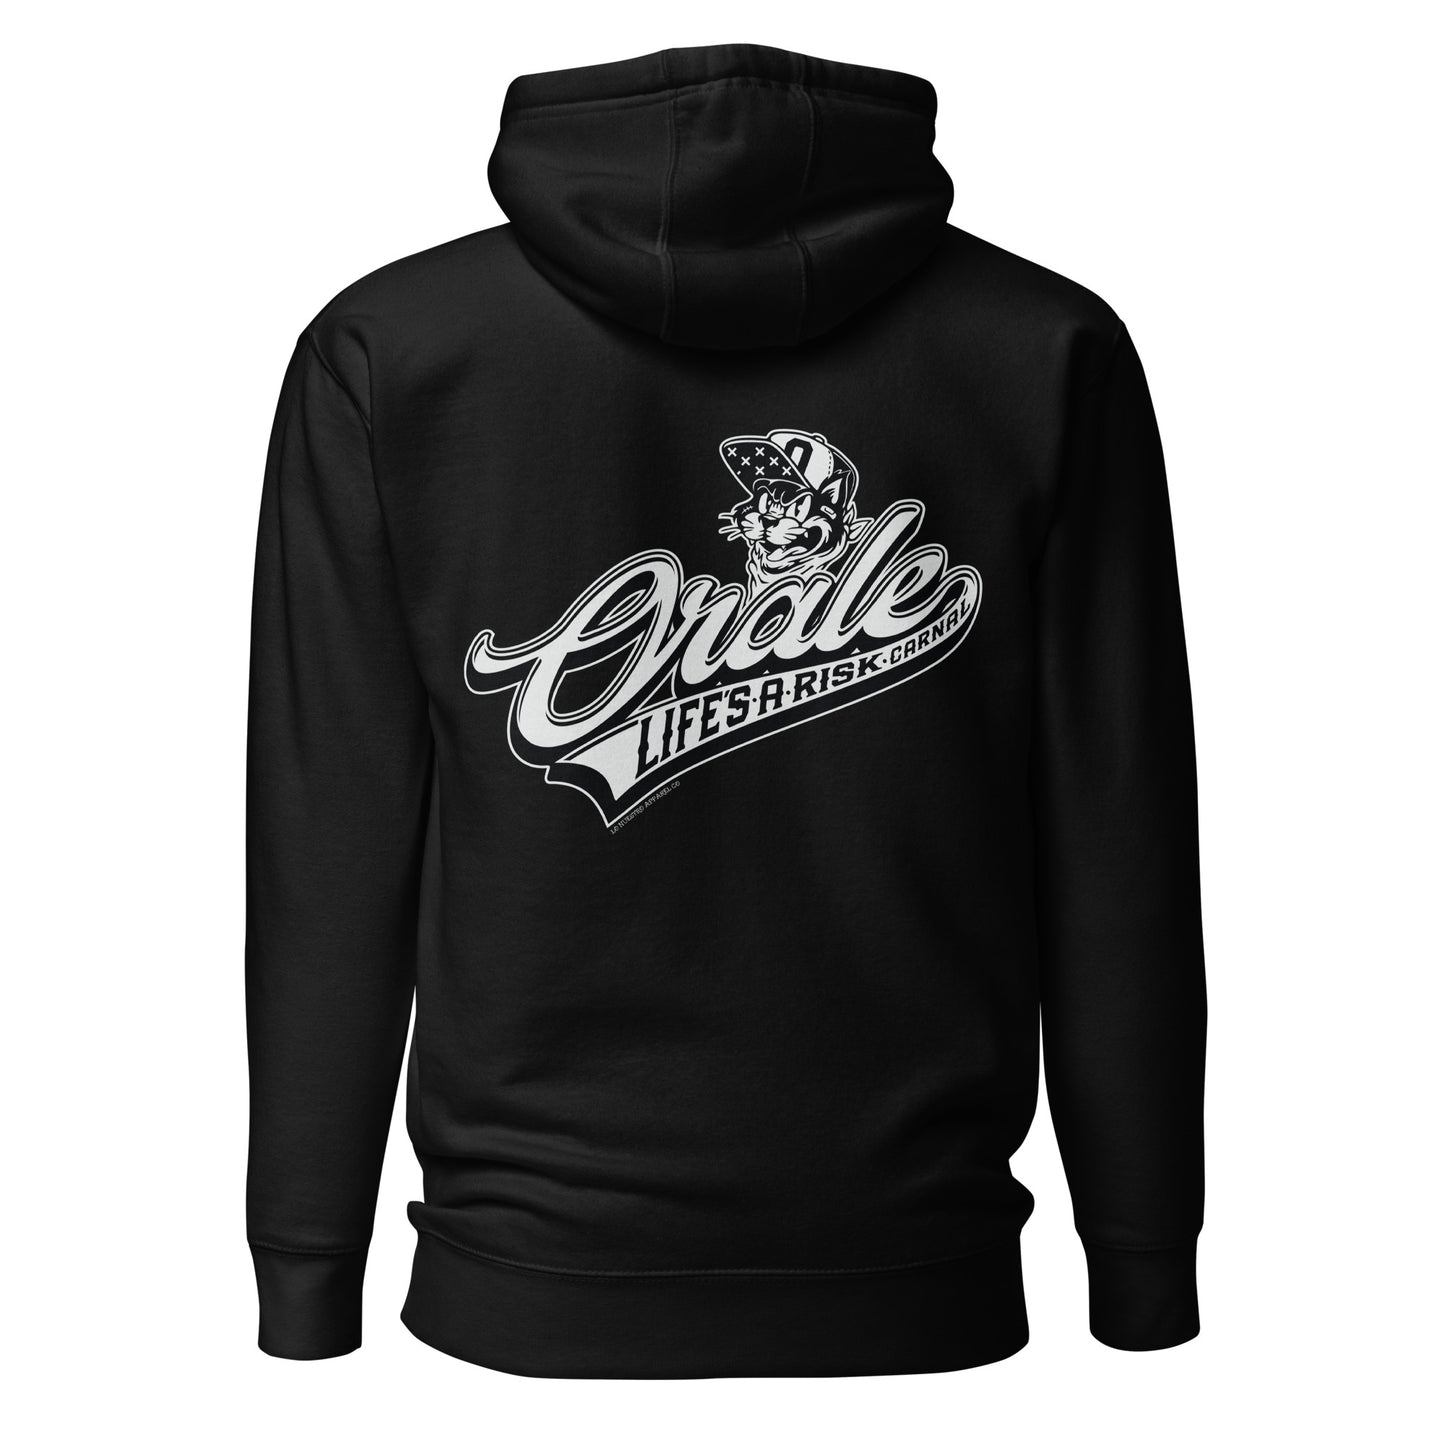 Black hoodie with "Life’s a Risk Carnal" front and back print, stylish Chicano apparel.